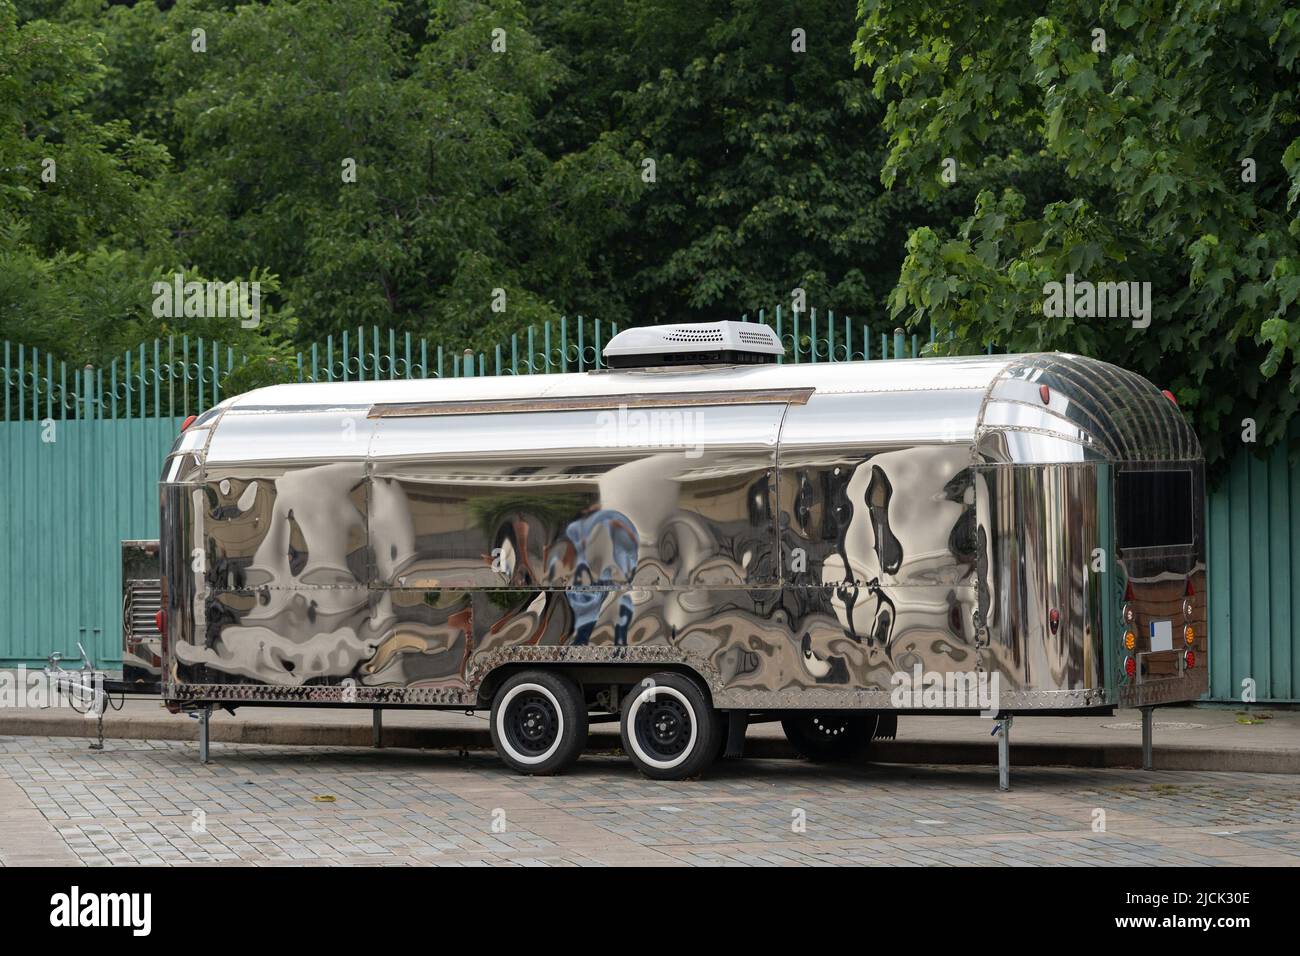 Retro style futuristic silver metal trailer van standing on summer day for fair, festival or event. Stock Photo